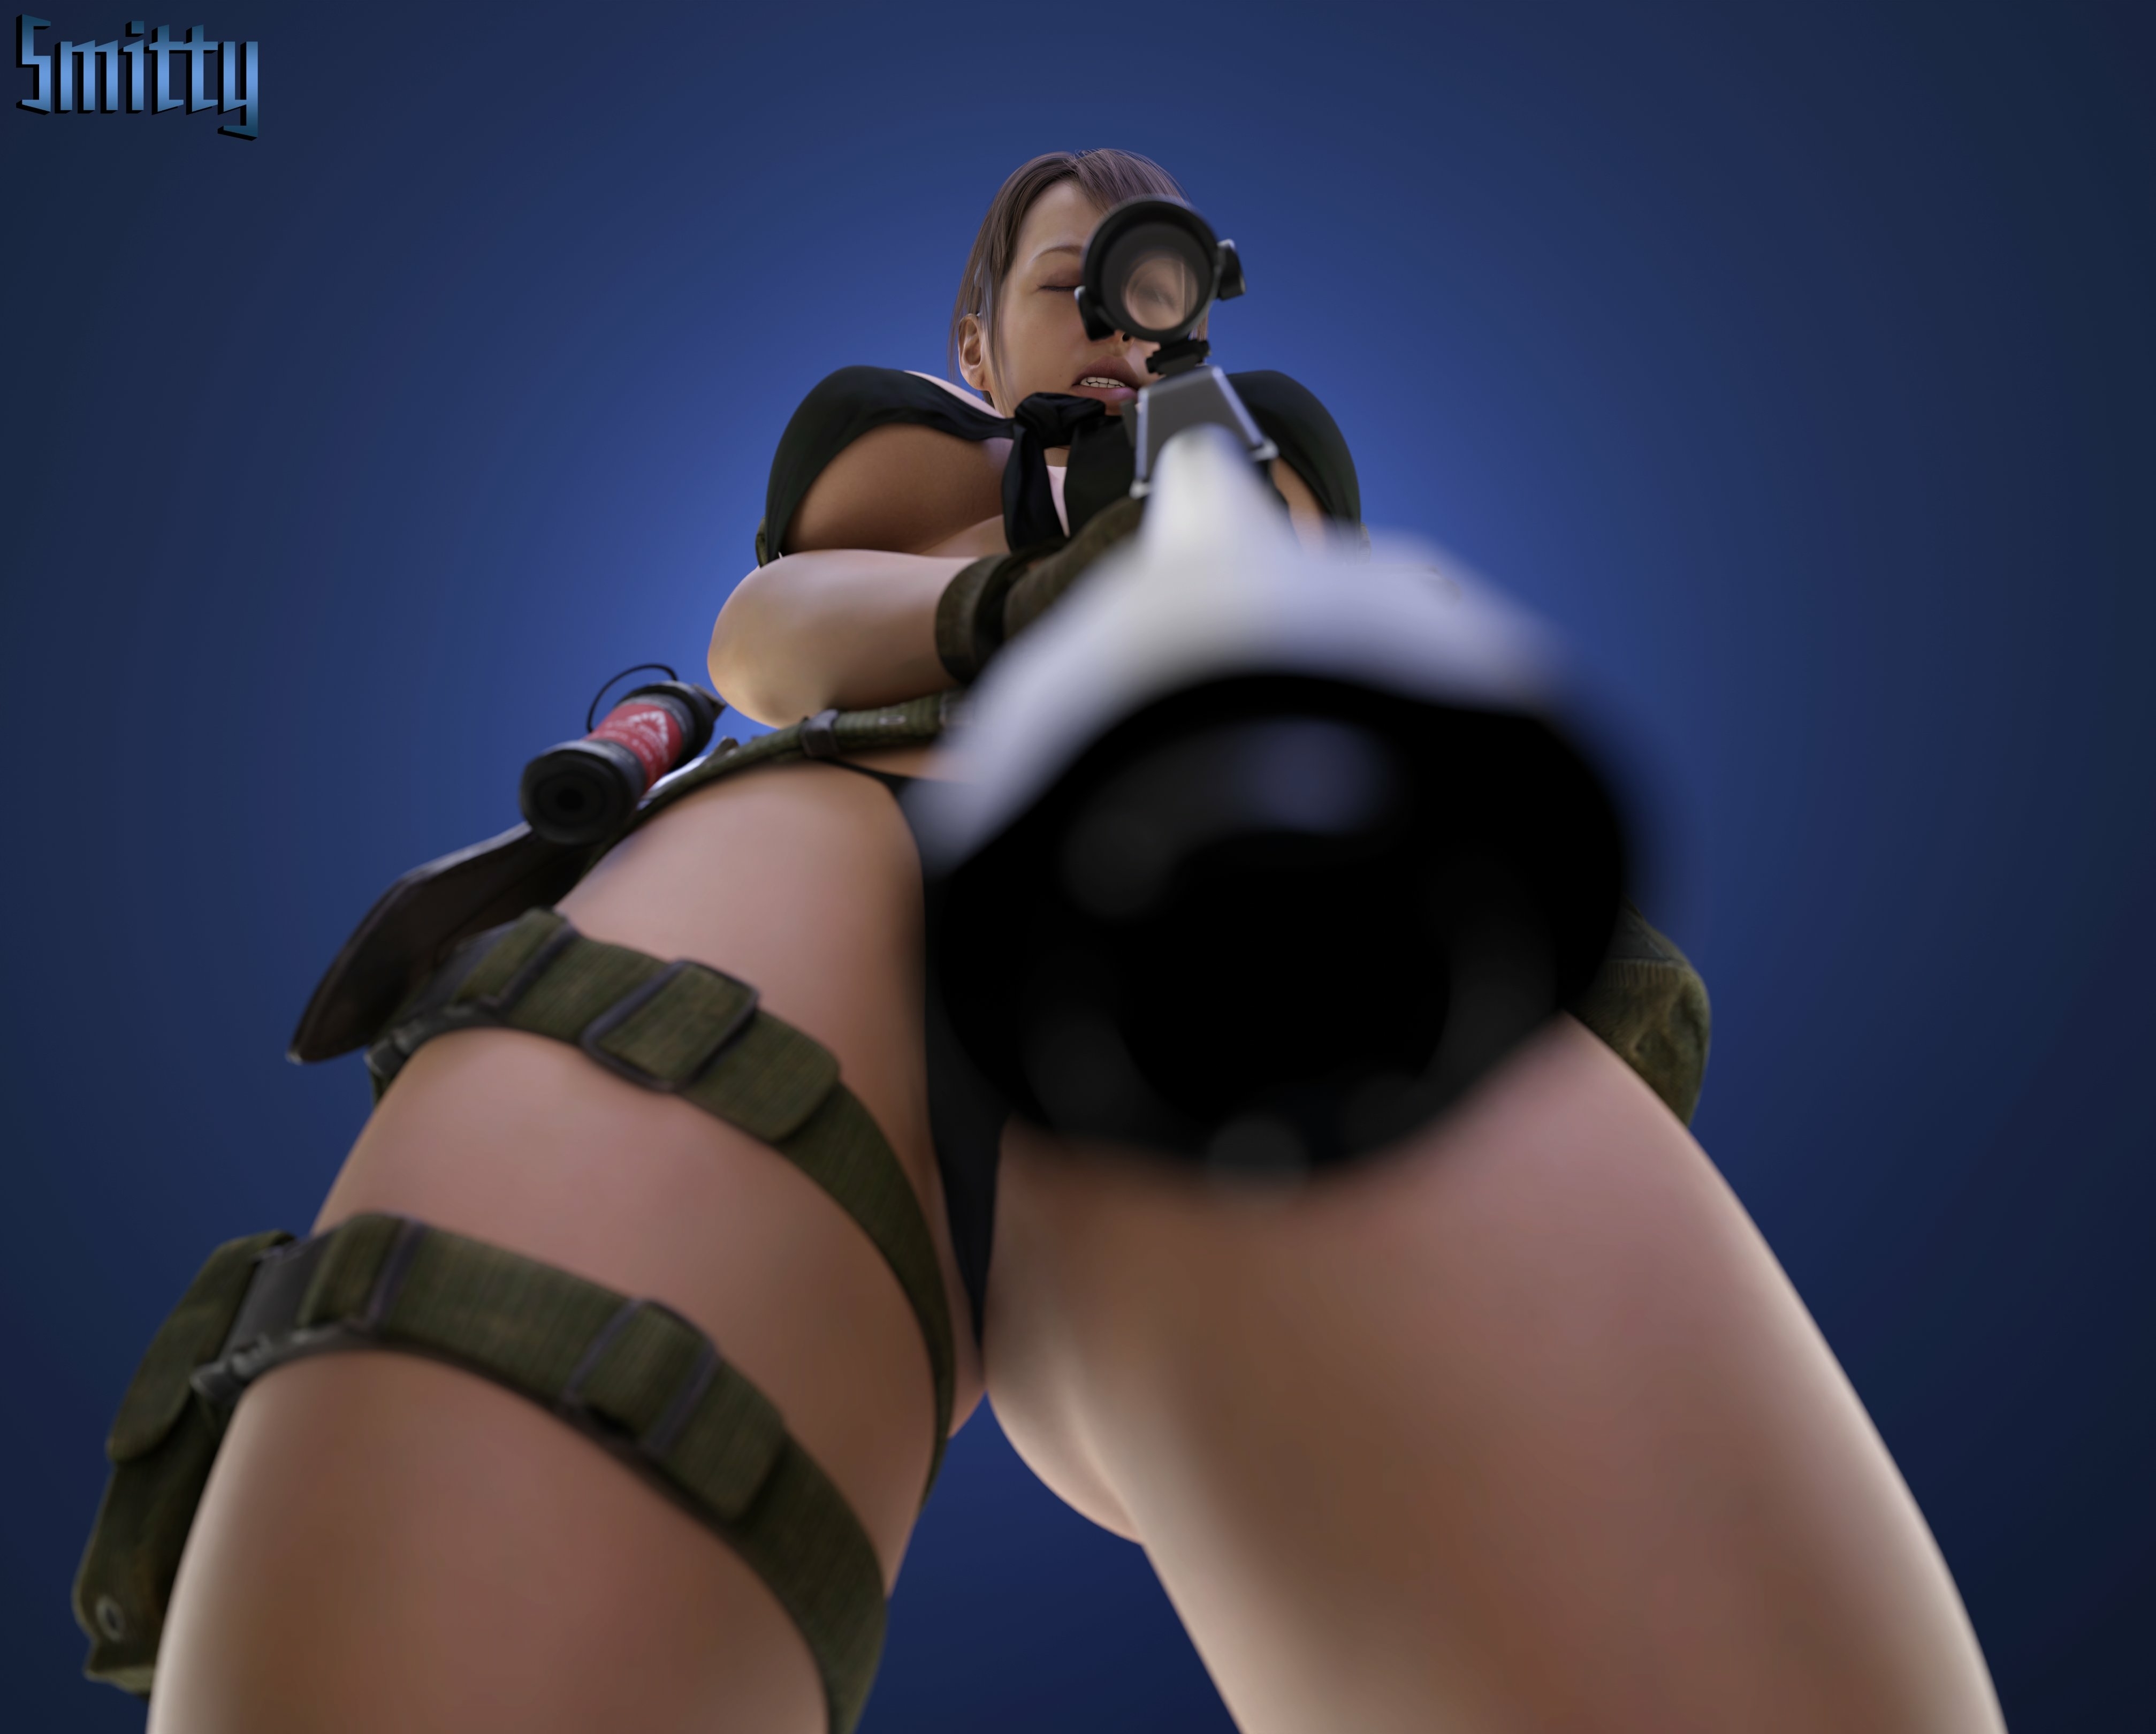 POV: Quiet is not happy with you  but you enjoy the view. Quiet Metal Gear Solid Lingerie Sexy Lingerie Boobs Big boobs Big Tits Ass Cake Sexy Horny Face Horny 3d Porn 2